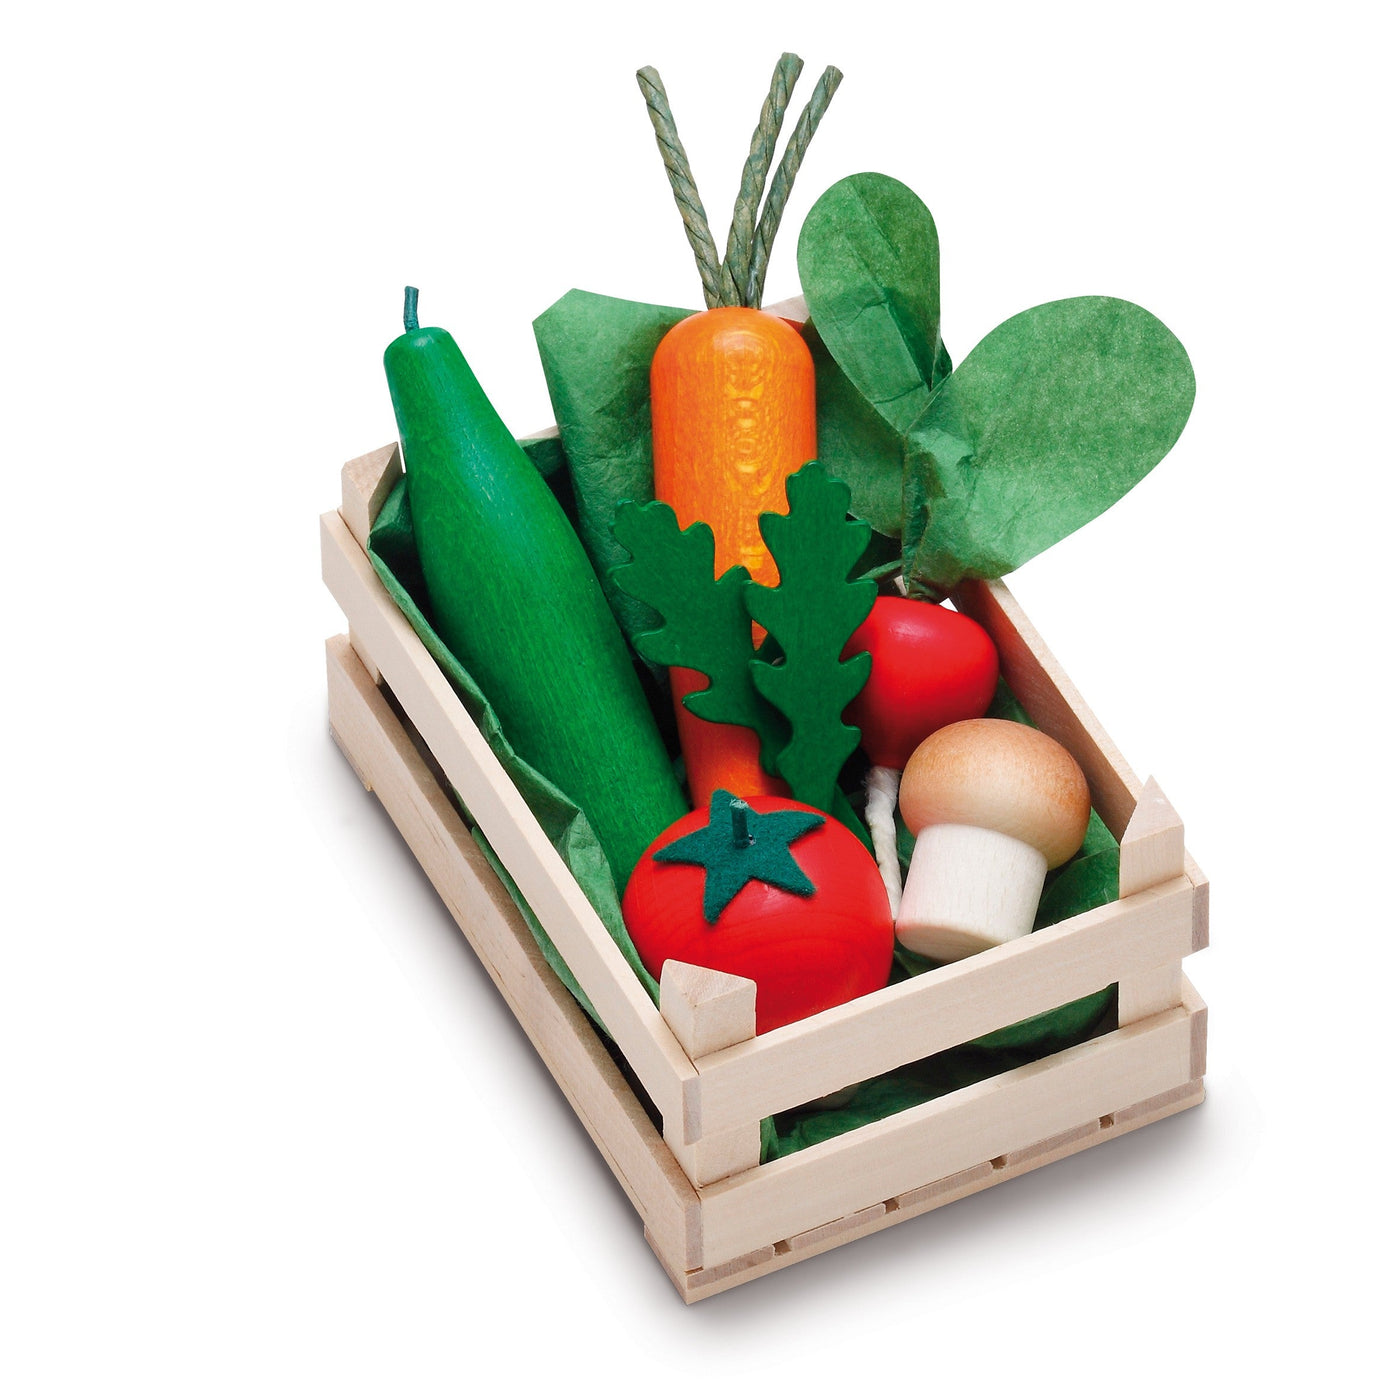 Erzi Small Vegetables in Crate - Wooden Play Food